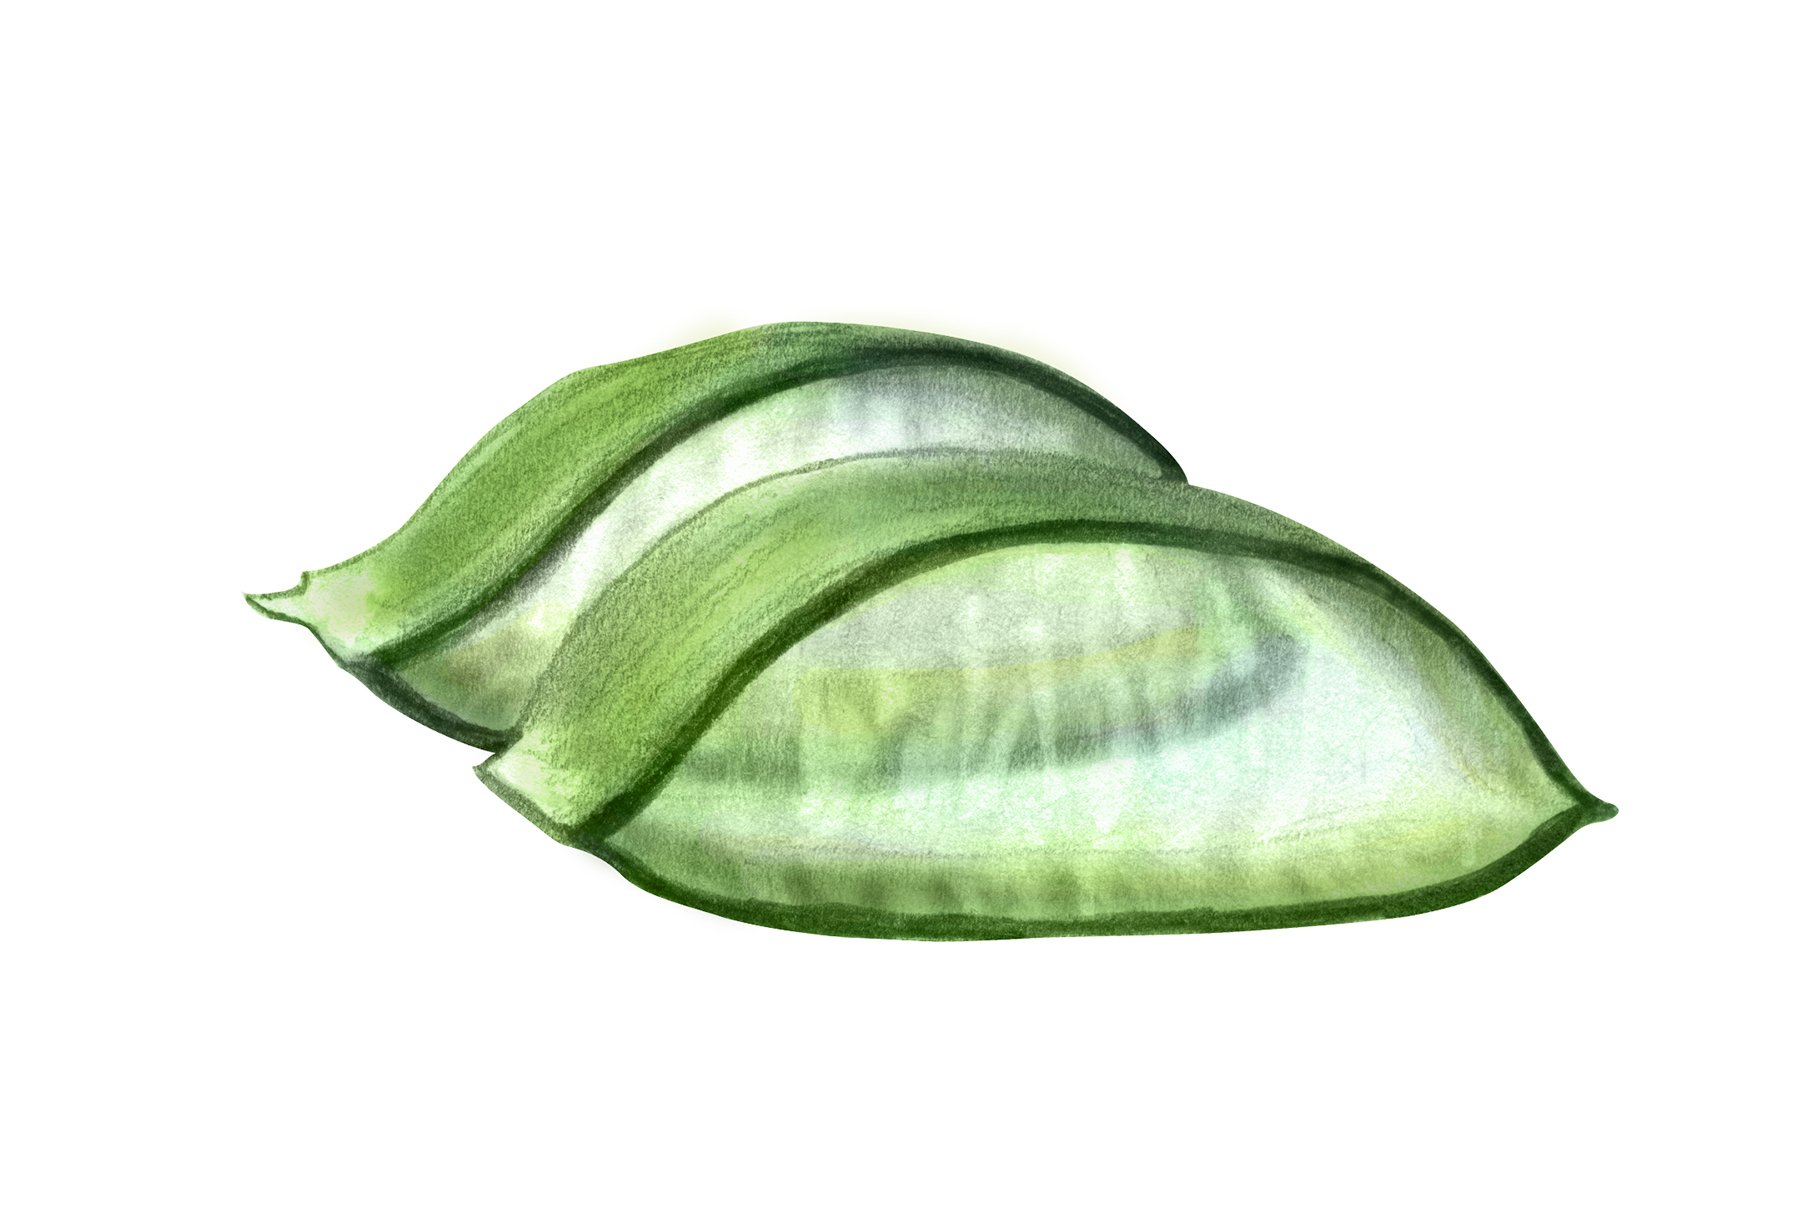 Drawing of a green leaf on a white background.